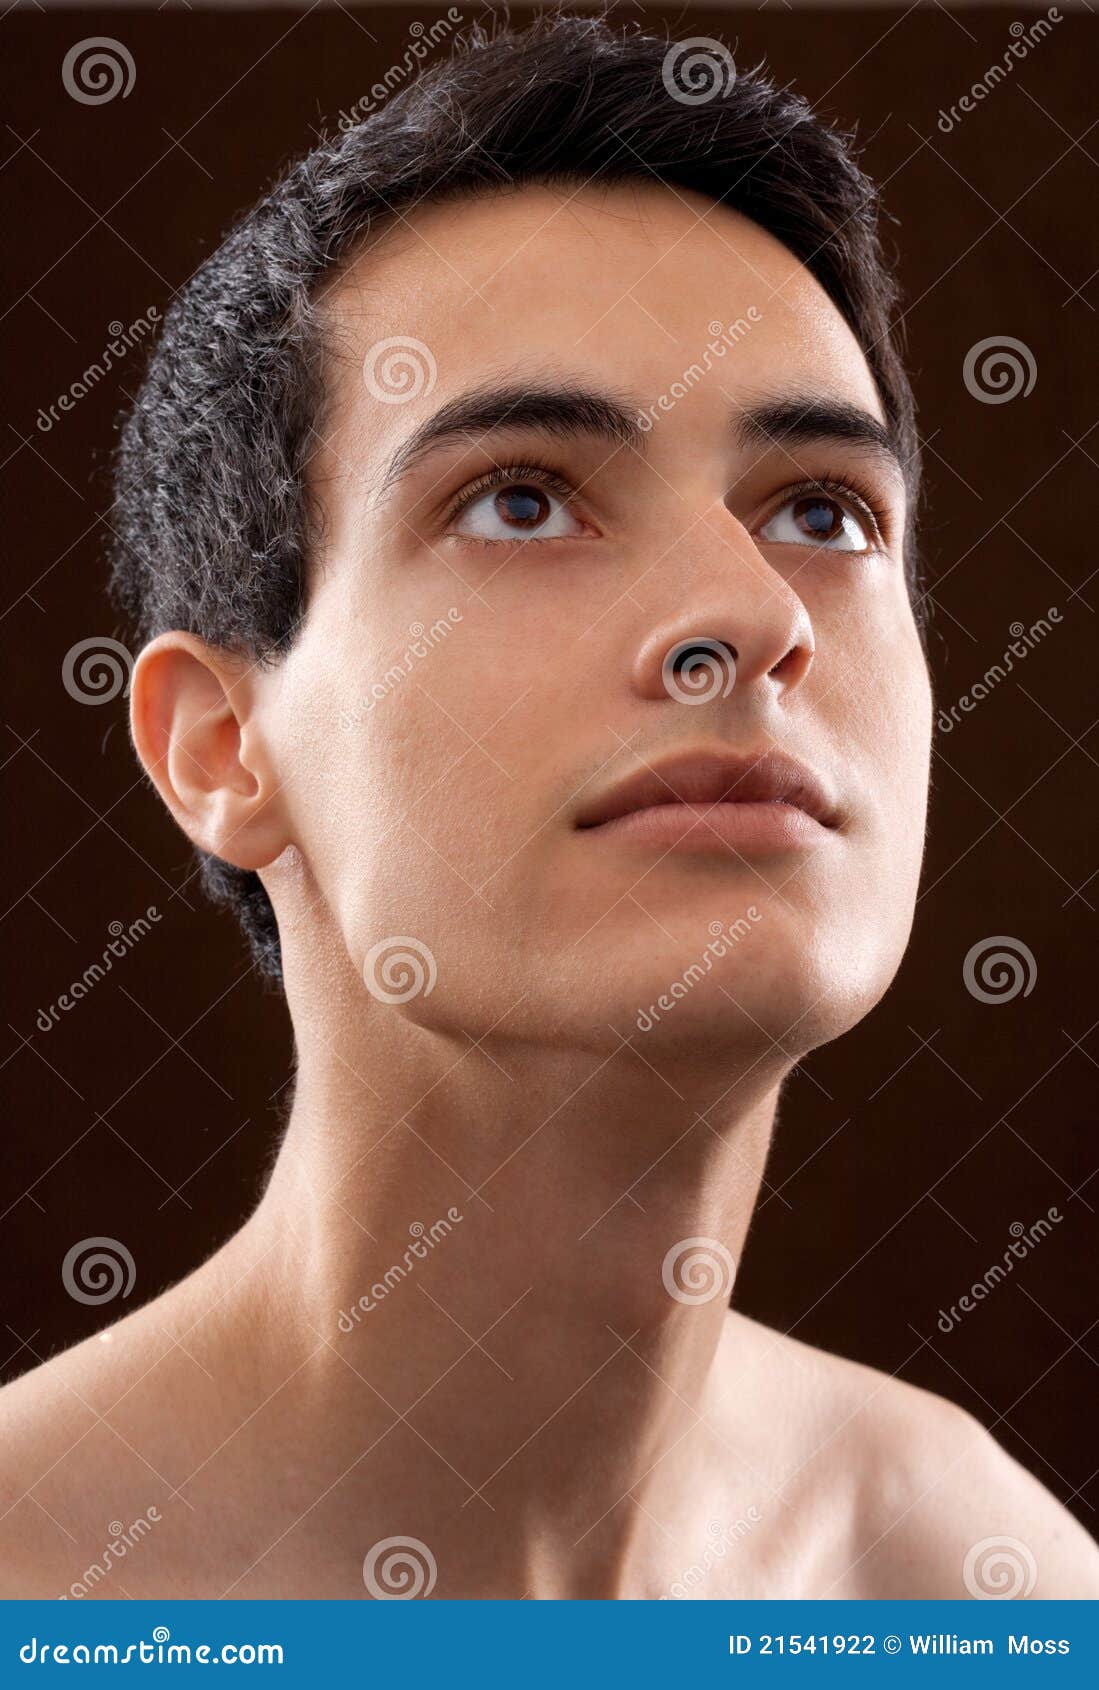 attractive young man looking upward intently